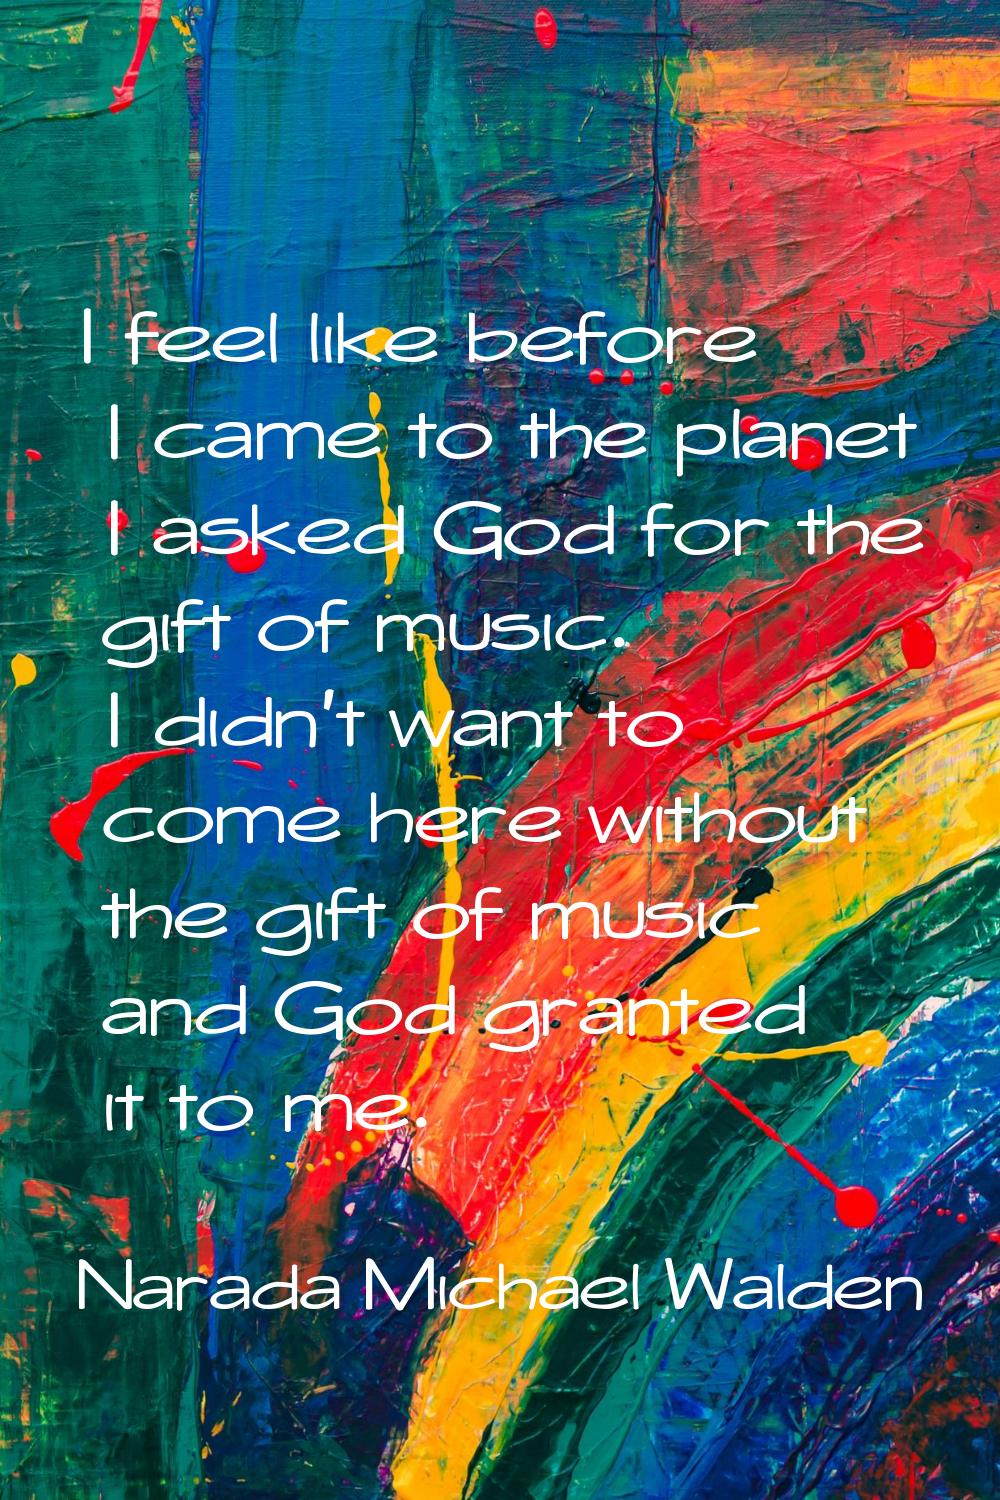 I feel like before I came to the planet I asked God for the gift of music. I didn't want to come he